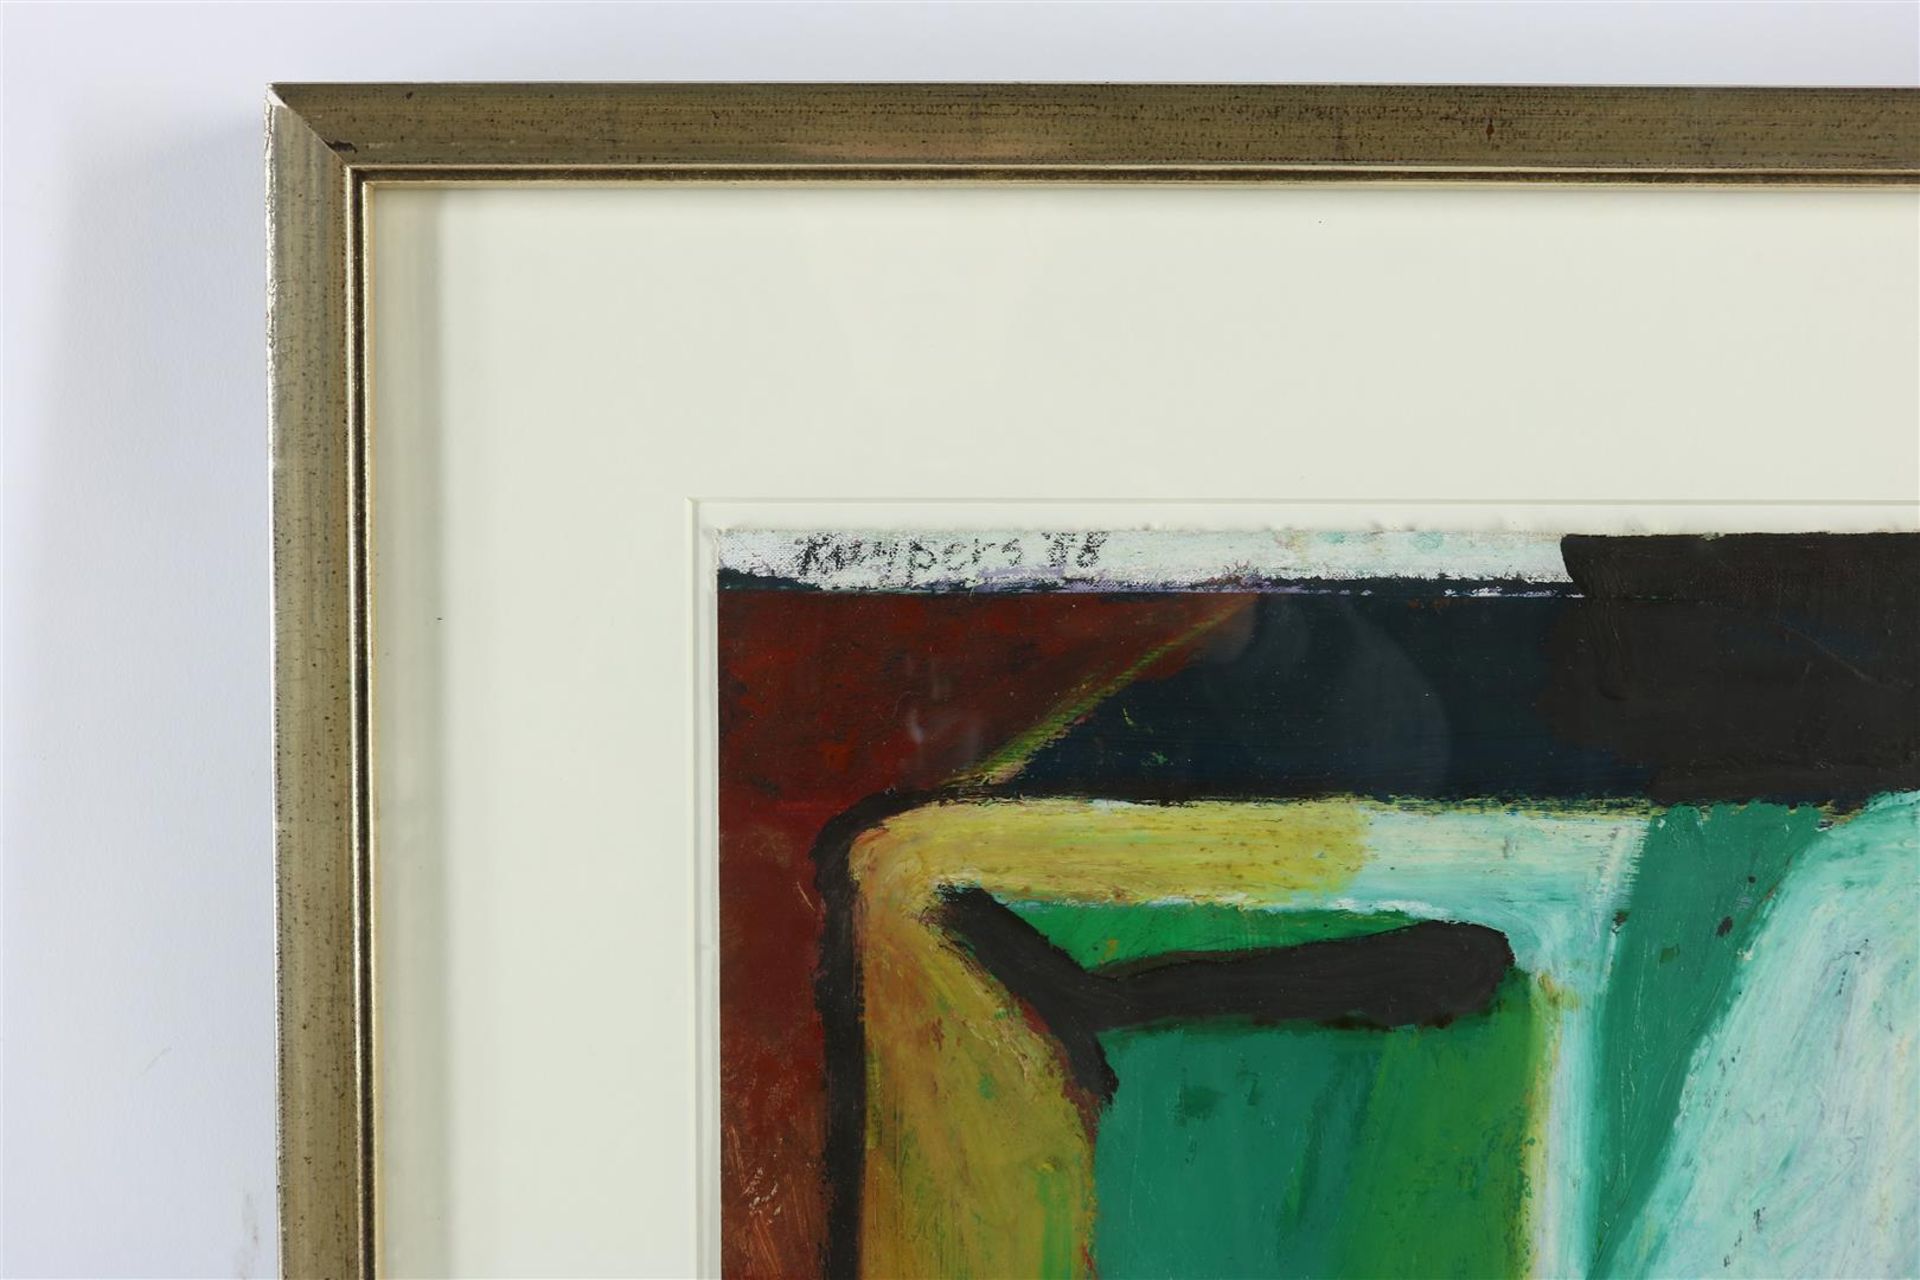 Modern composition, signed Kuypers top left and dated '88, oil on paper and canvas, 30 x 38 cm. - Image 3 of 4